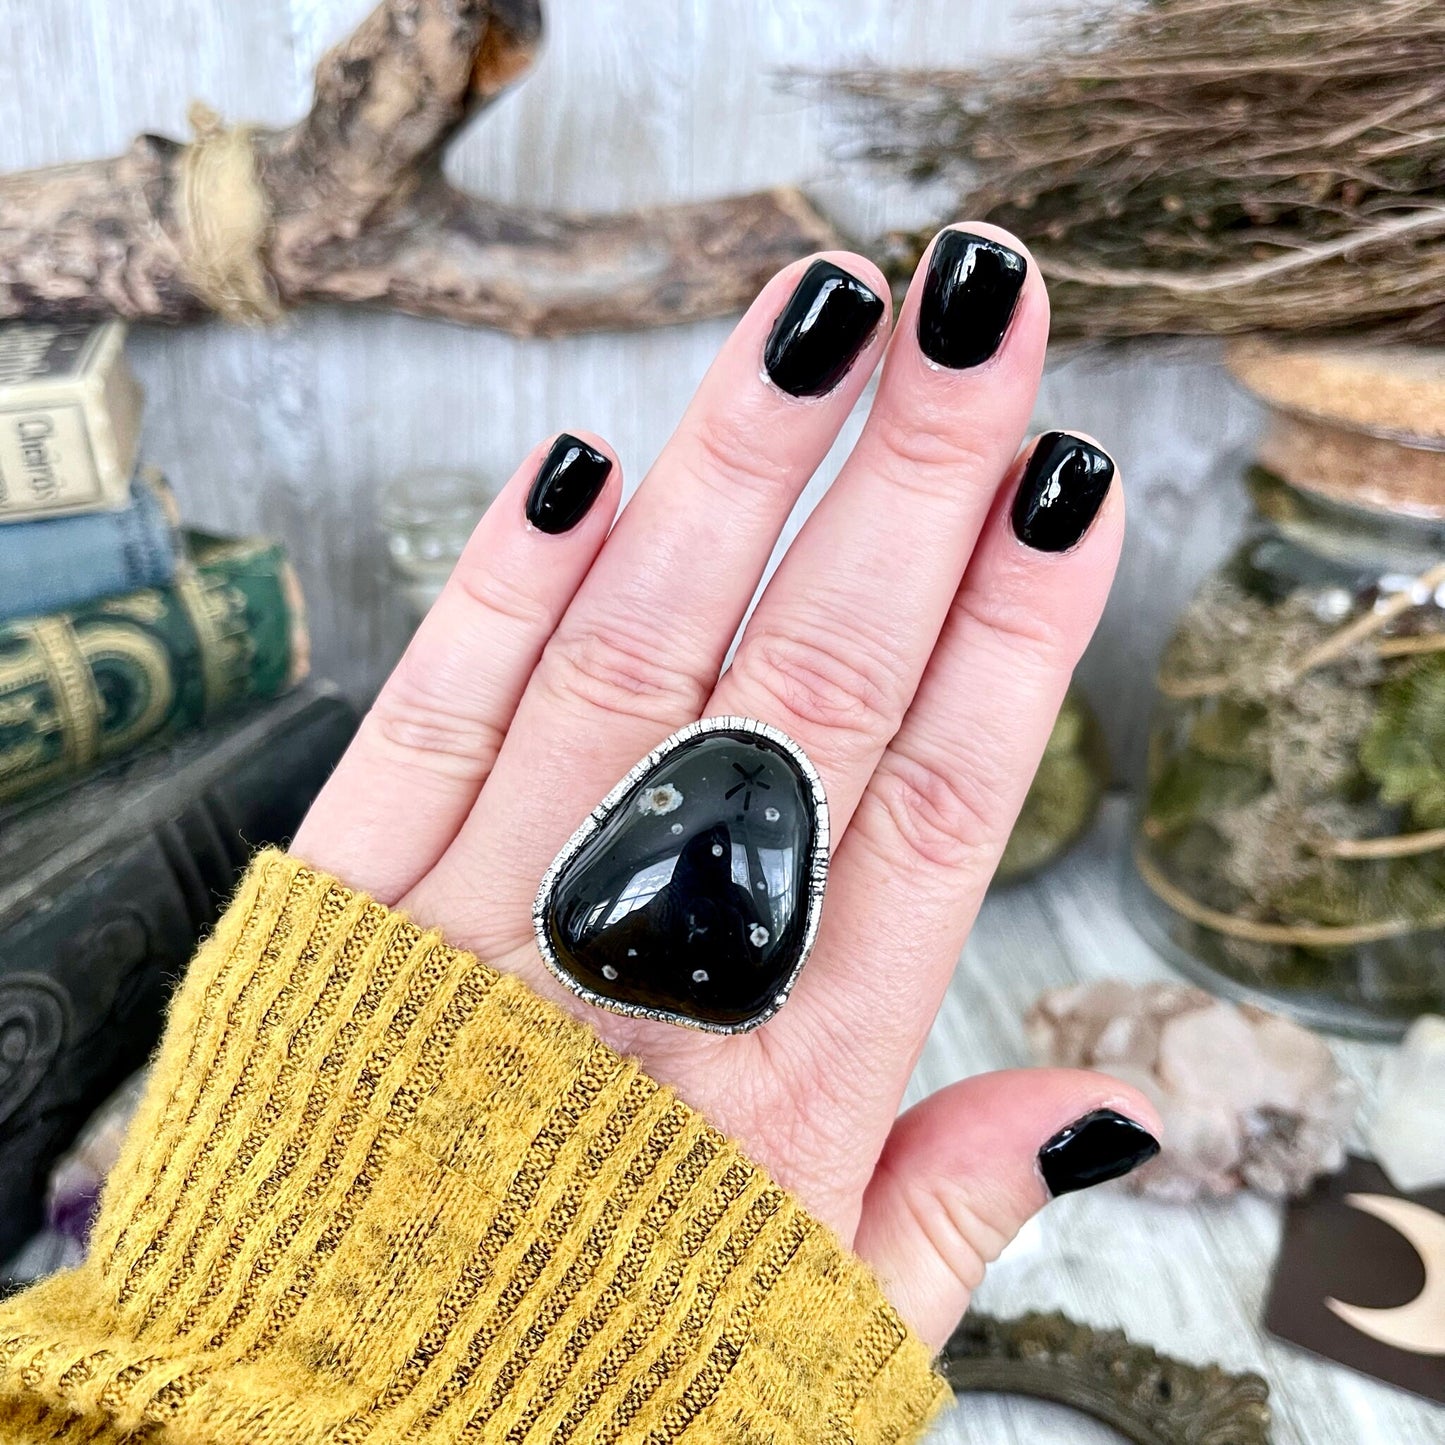 Size 9 Natural Black Tumbled Stone Agate Ring in Fine Silver/ Foxlark Collection - One of a Kind